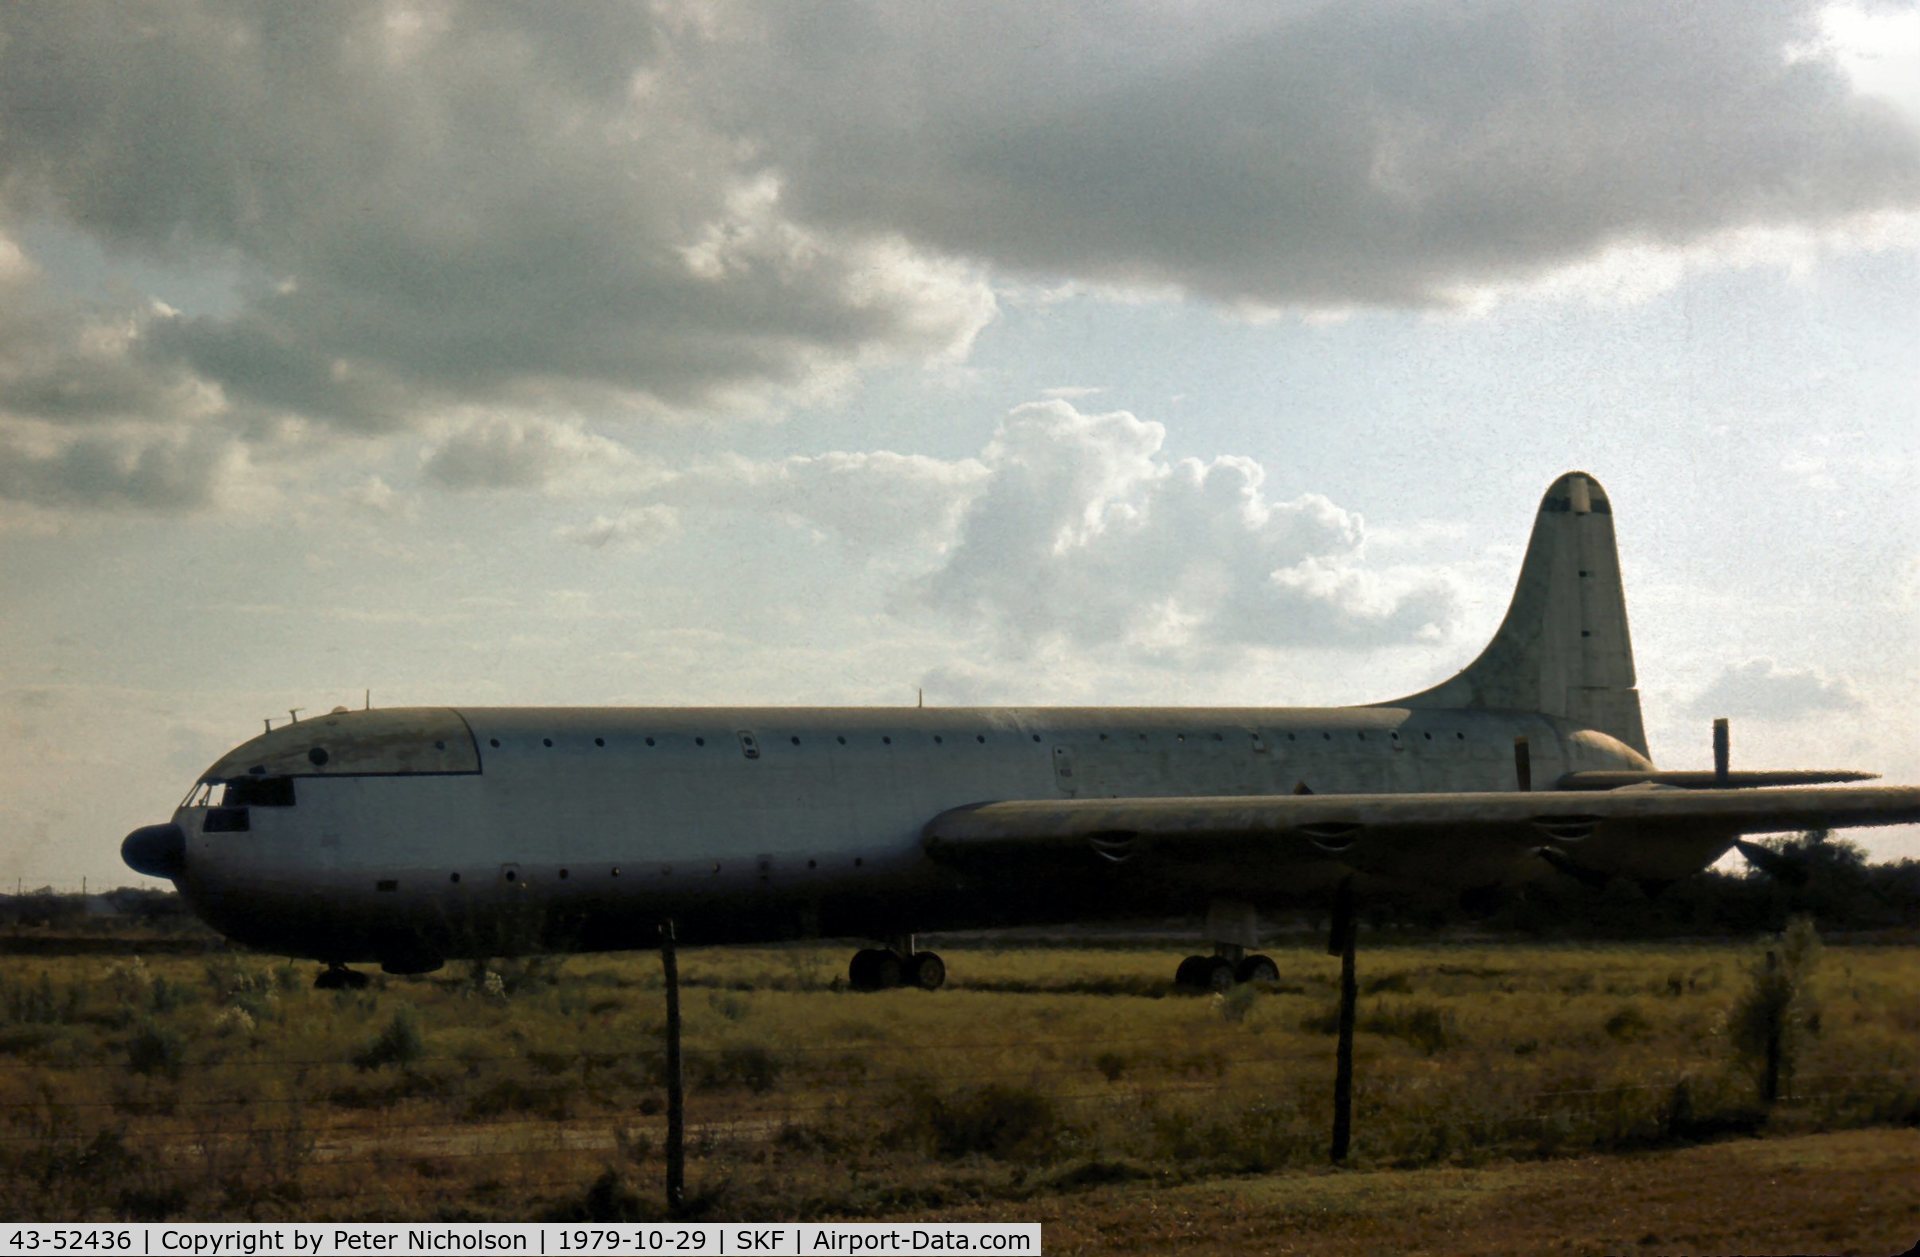 43-52436, 1943 Consolidated XC-99 C/N Not found 43-52436, Consolidated XC-99 as seen at Kelly AFB in October 1979 - now being restored for display in the National Museum.